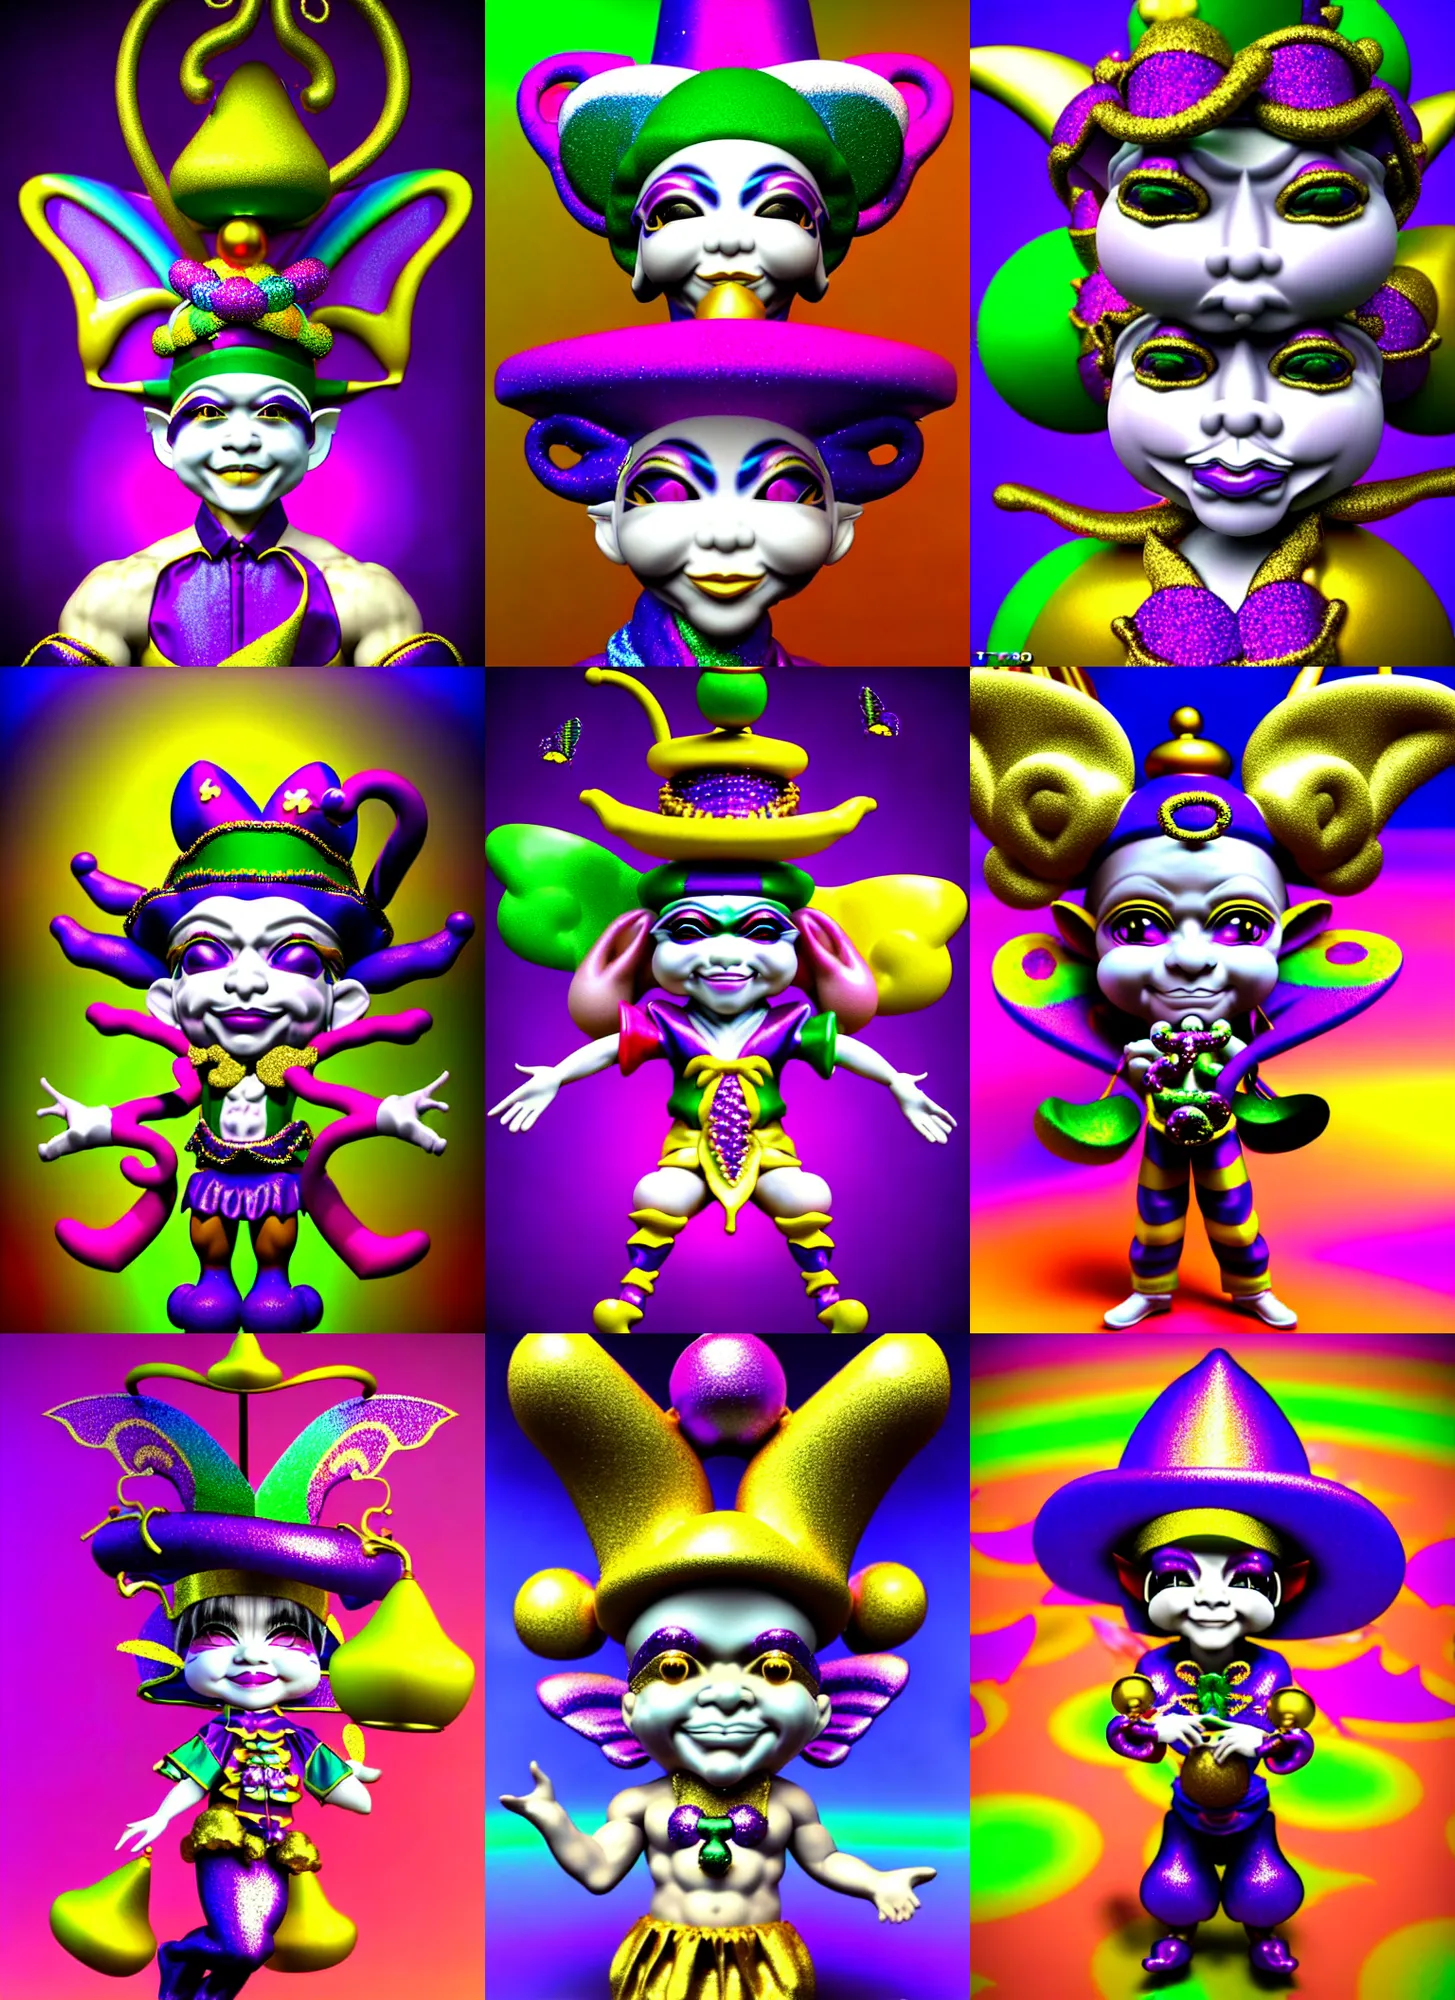 Prompt: 3d render of chibi mardi gras jester by Ichiro Tanida wearing a 'jester cap and bells' and wearing angel wings against a psychedelic swirly background with 3d butterflies and 3d flowers n the style of 1990's CG graphics 3d rendered y2K aesthetic by Ichiro Tanida, 3DO magazine